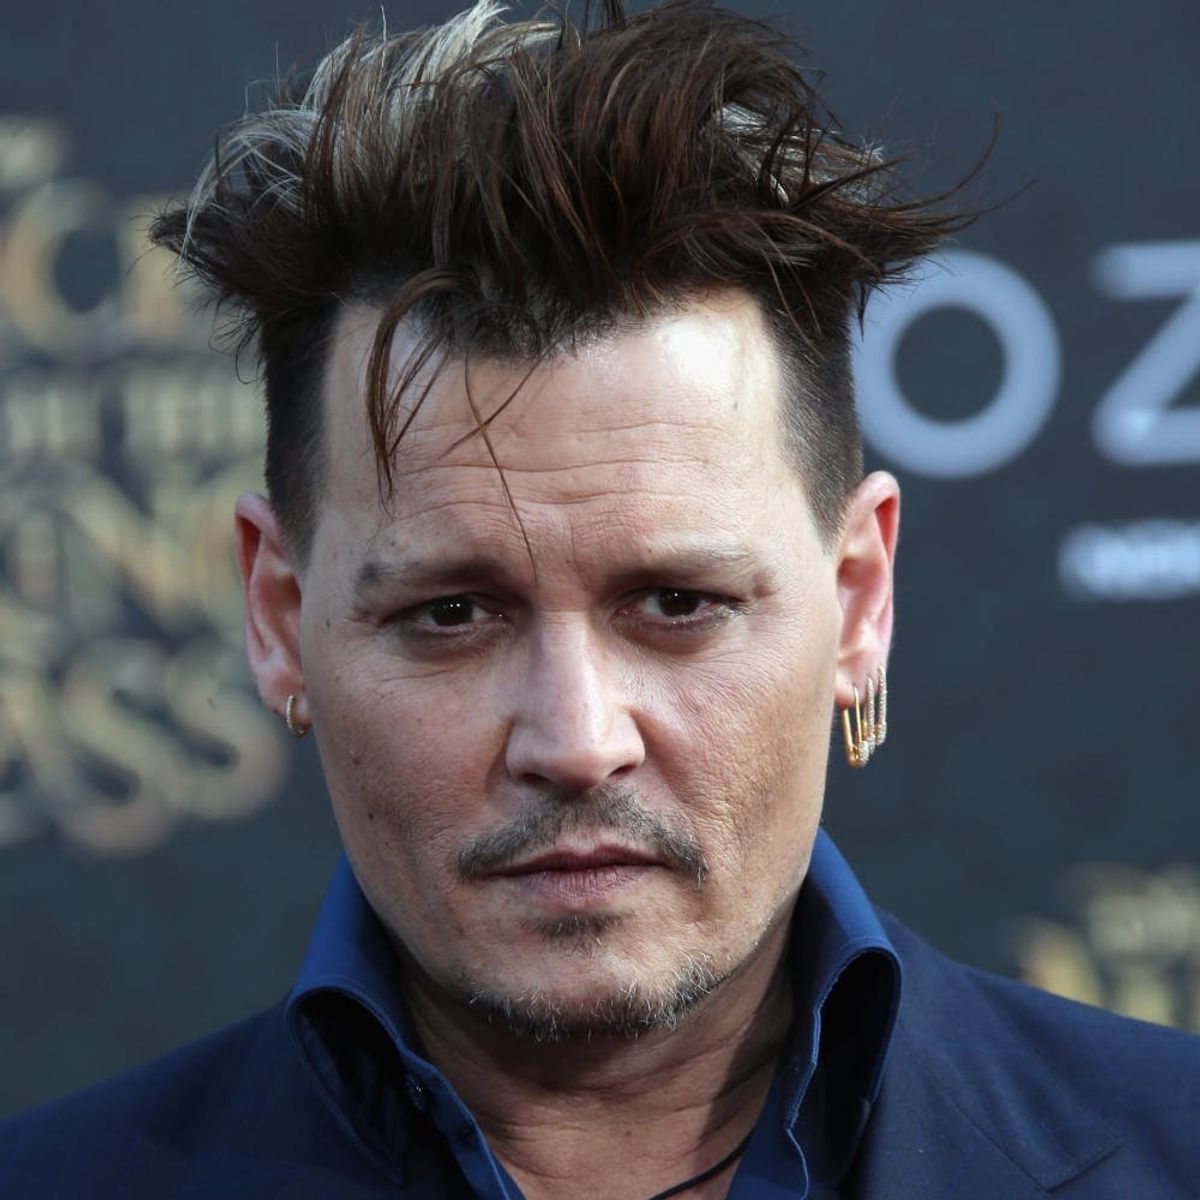 Johnny Depp Is Joining the Harry Potter Universe With a Role in Fantastic Beasts and Folks Are NOT Happy